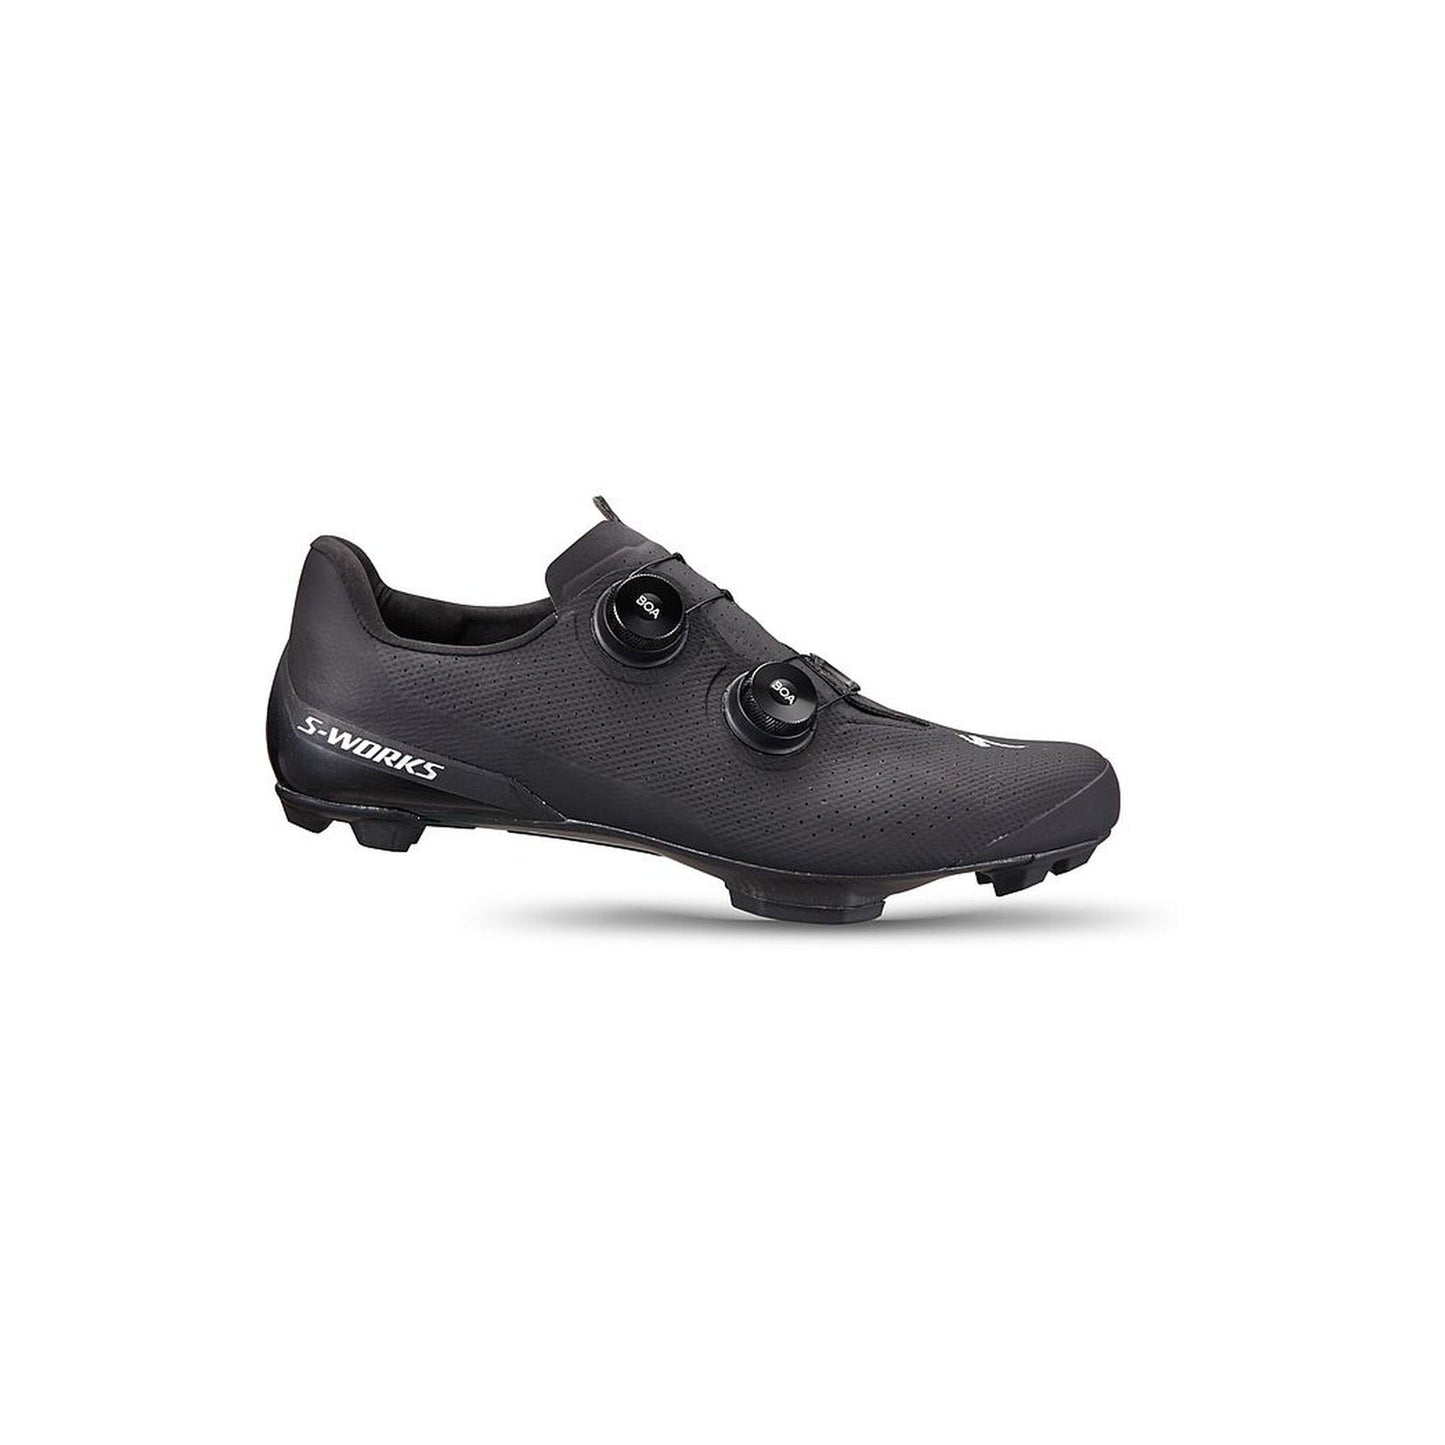 S-Works Recon Shoe-Cycles Direct Specialized